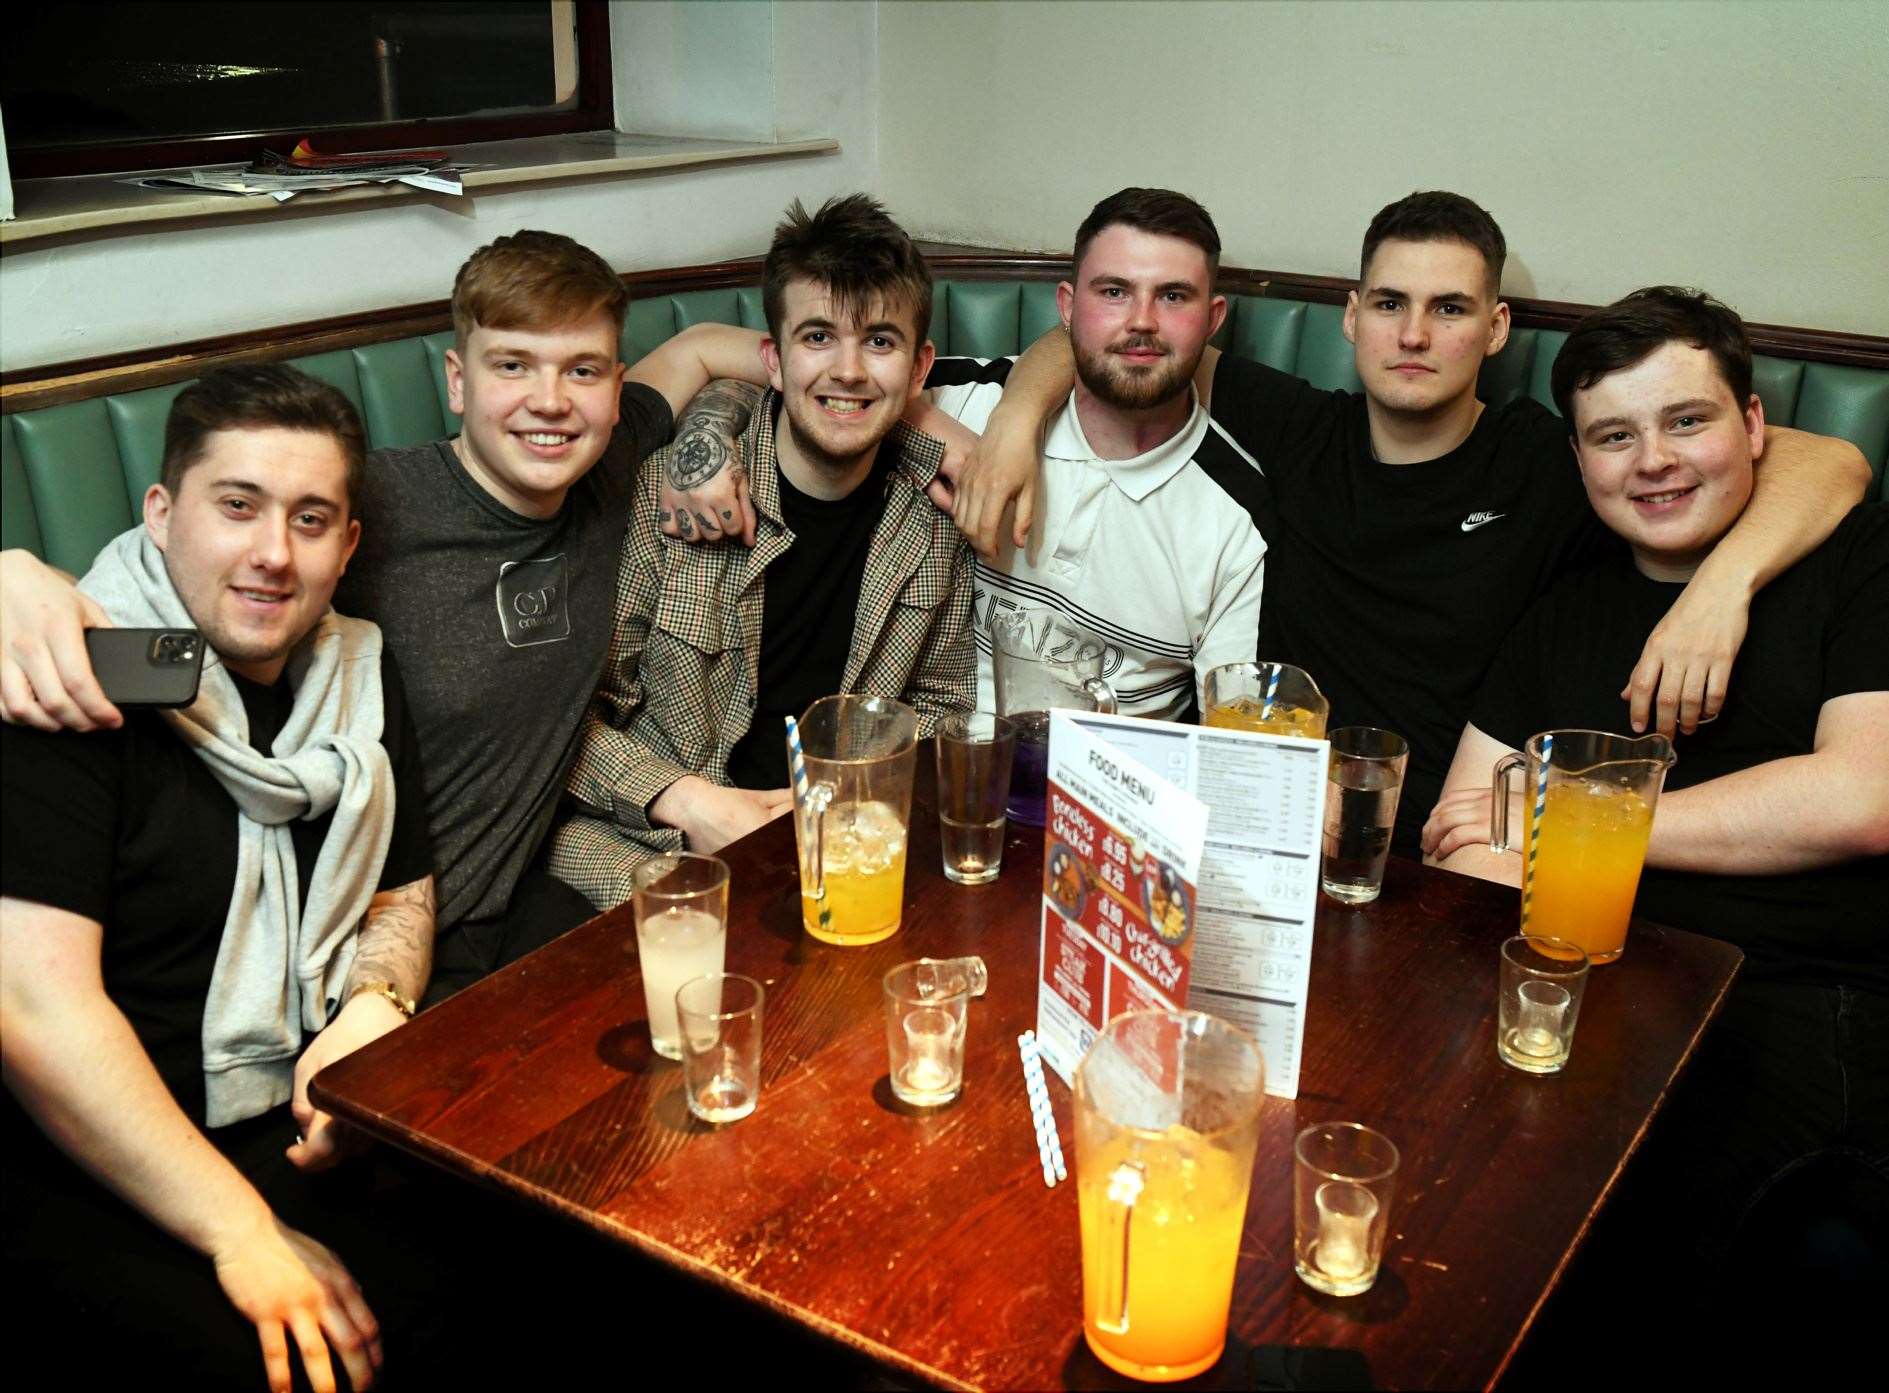 Daniel McDirmid (3rd from left) on his Stag Do